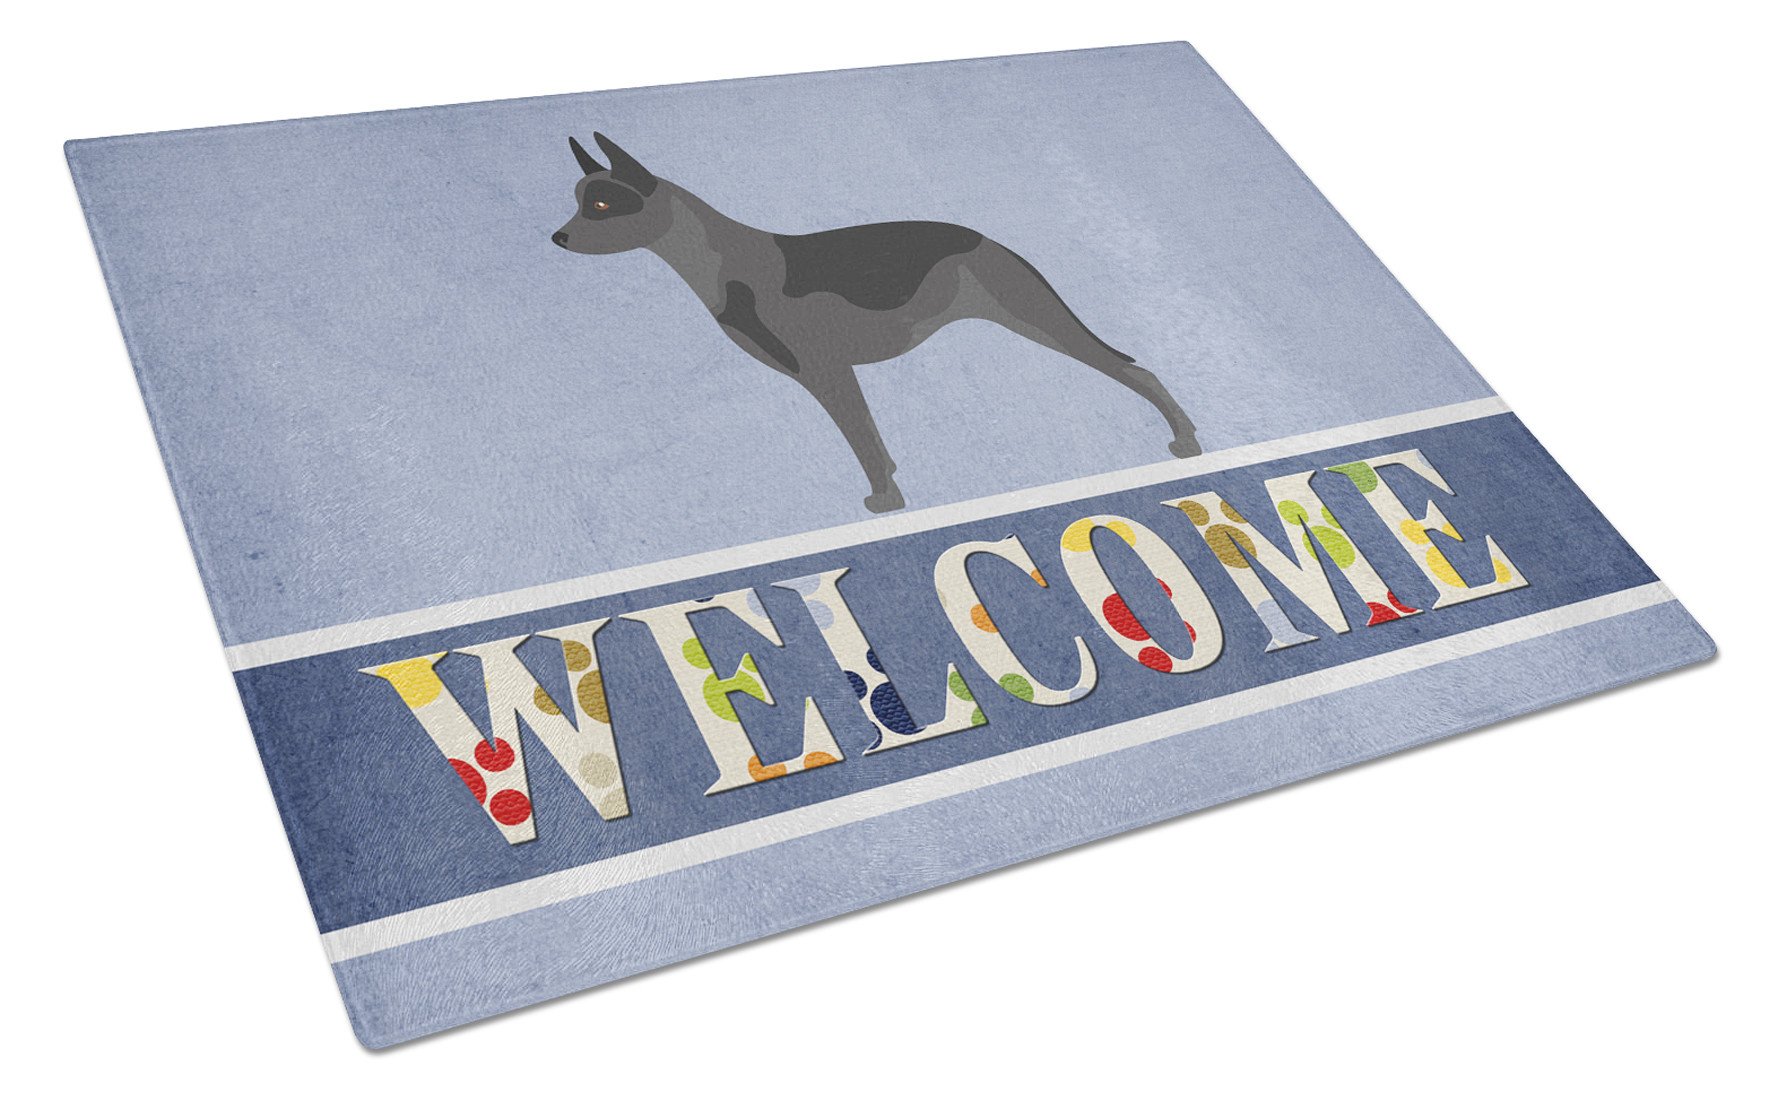 Australian Cattle Dog Welcome Glass Cutting Board Large BB8289LCB by Caroline's Treasures